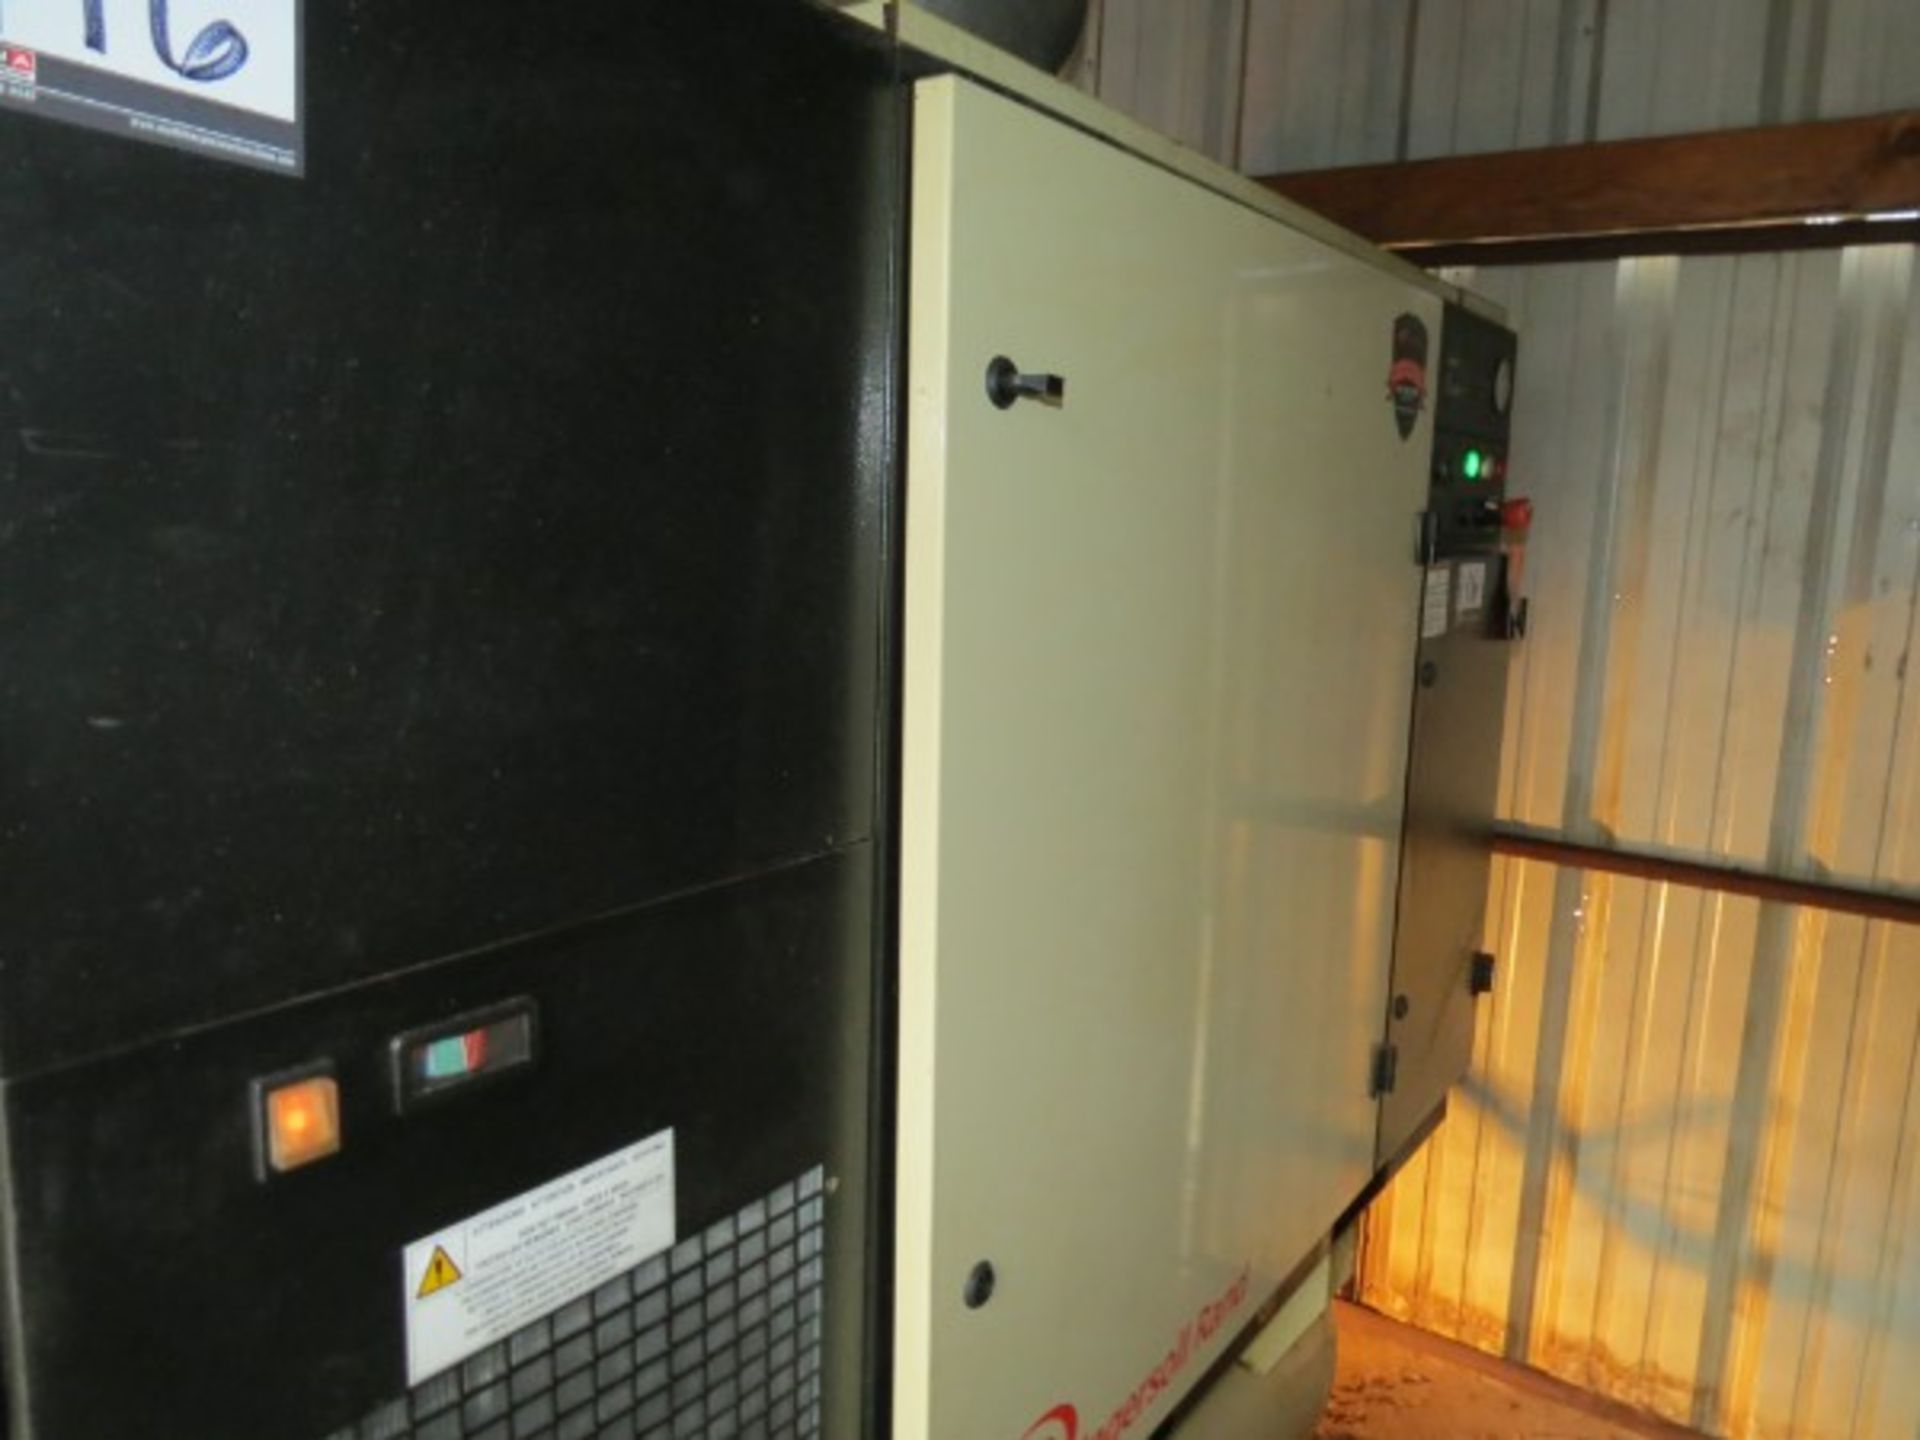 Ingersoll Rand I-R UP30, Rotary Screw Air Compressors, S/N 12M-010659 with Air Dryer - Image 5 of 6